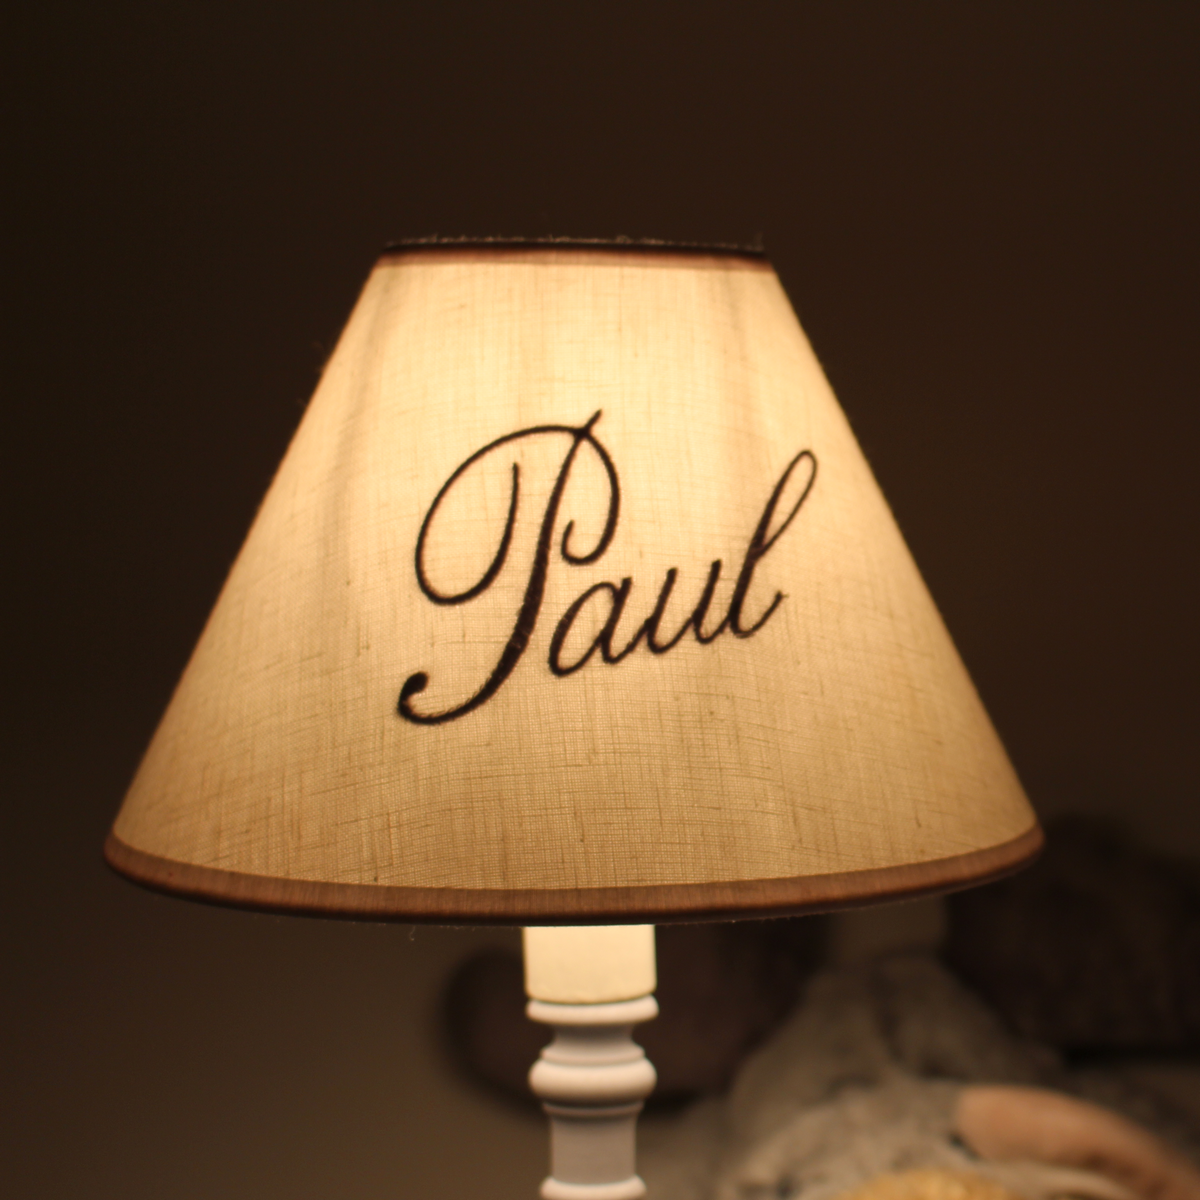 Birth gift: a personalised embroidered lampshade